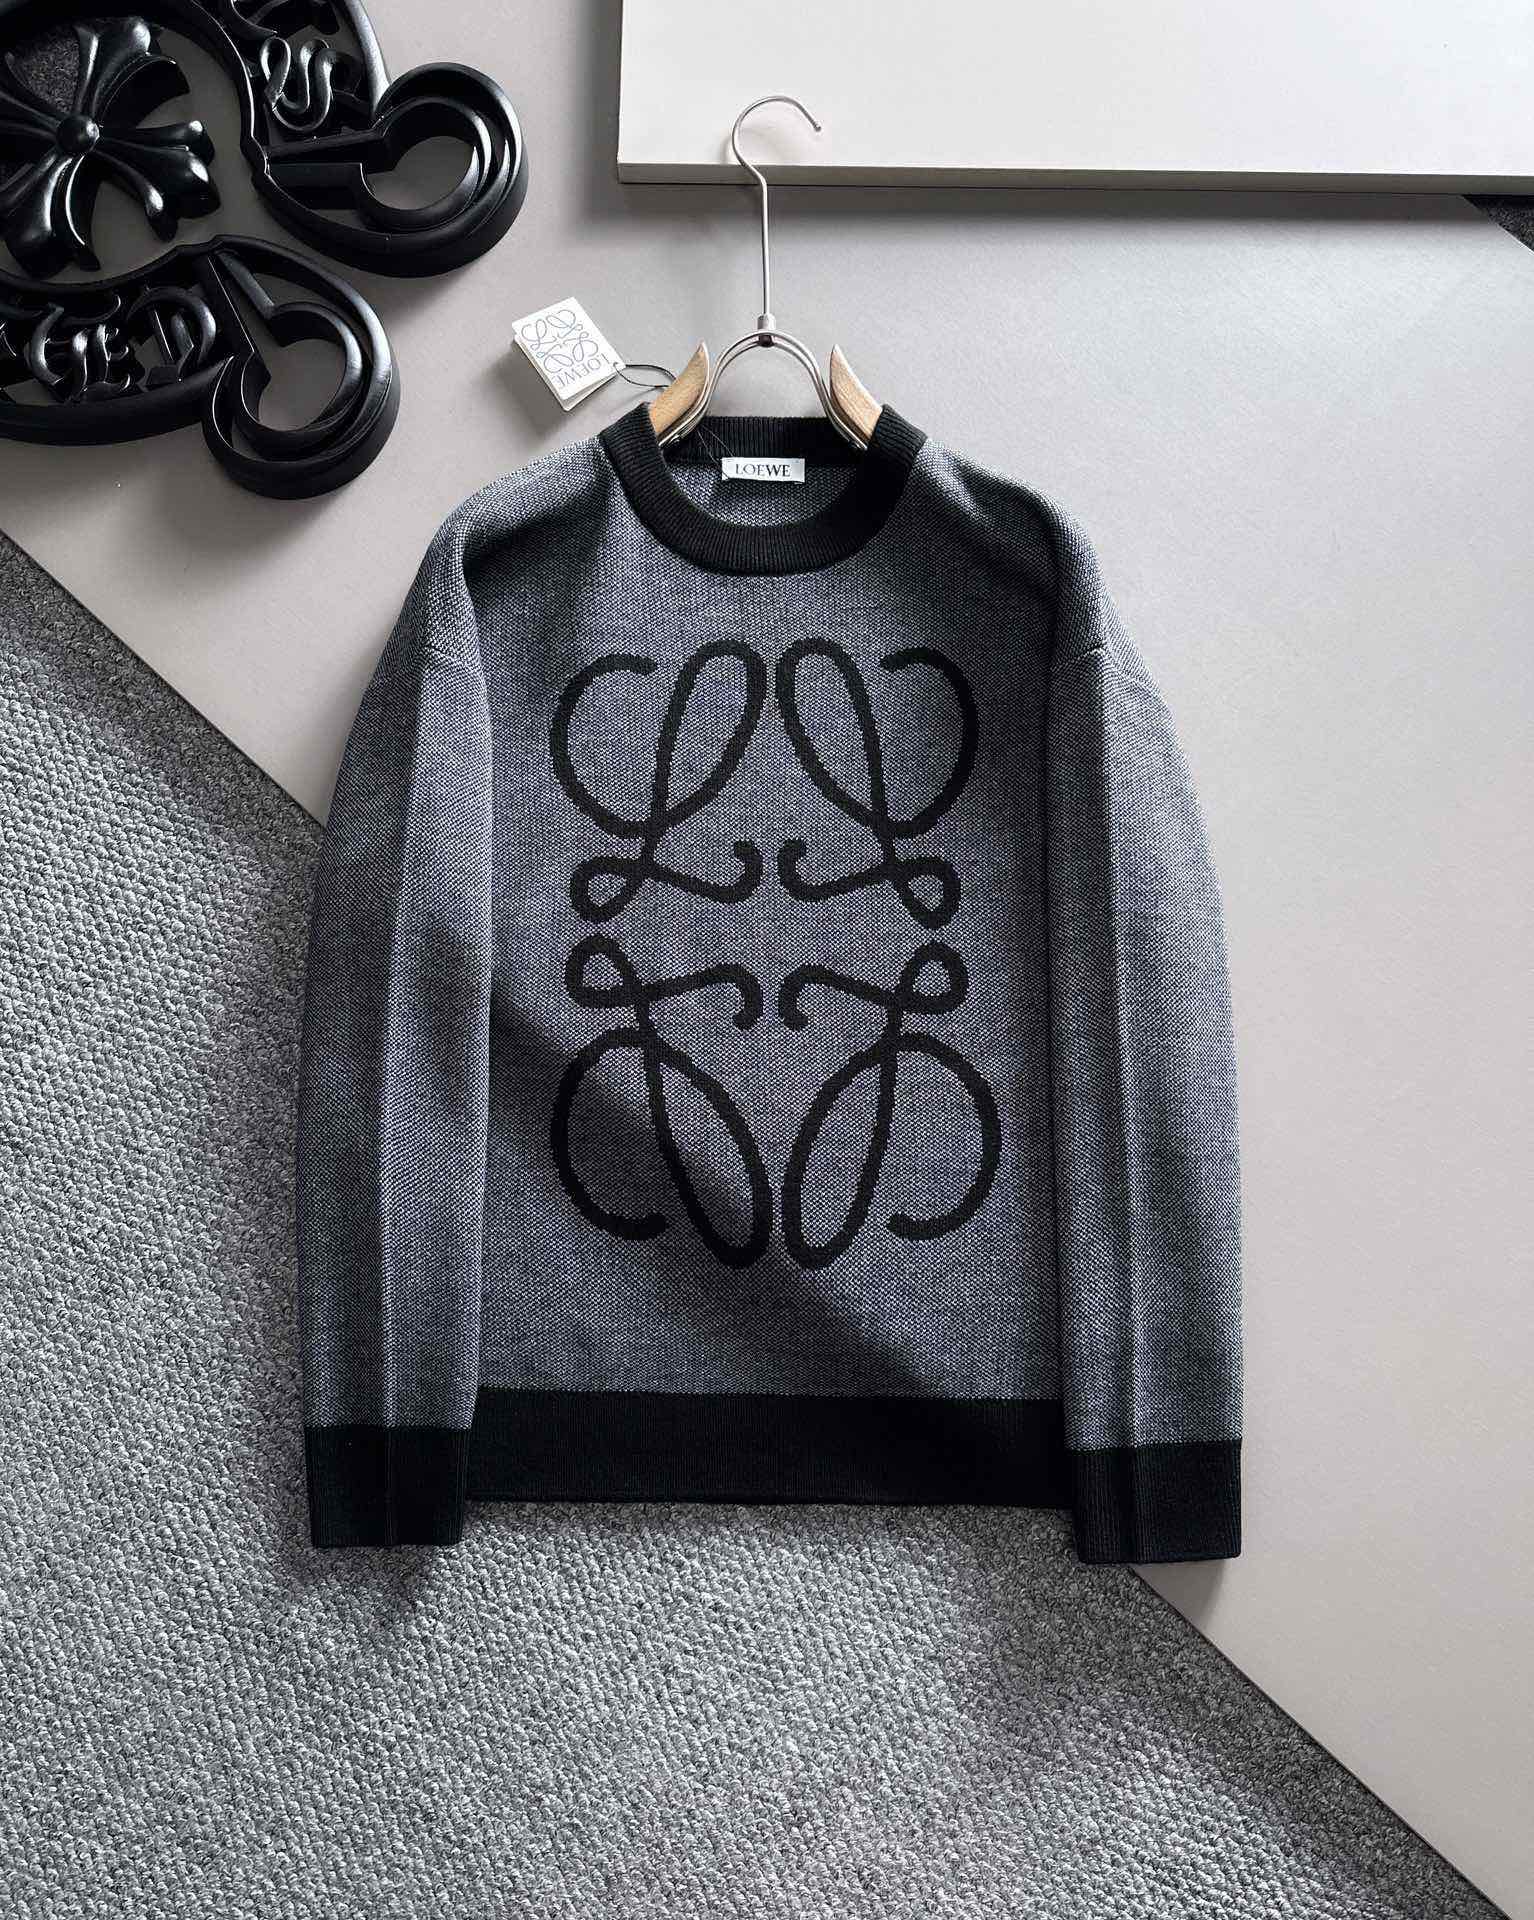 Loewe Clothing Sweatshirts Cashmere Spandex Wool Fall/Winter Collection